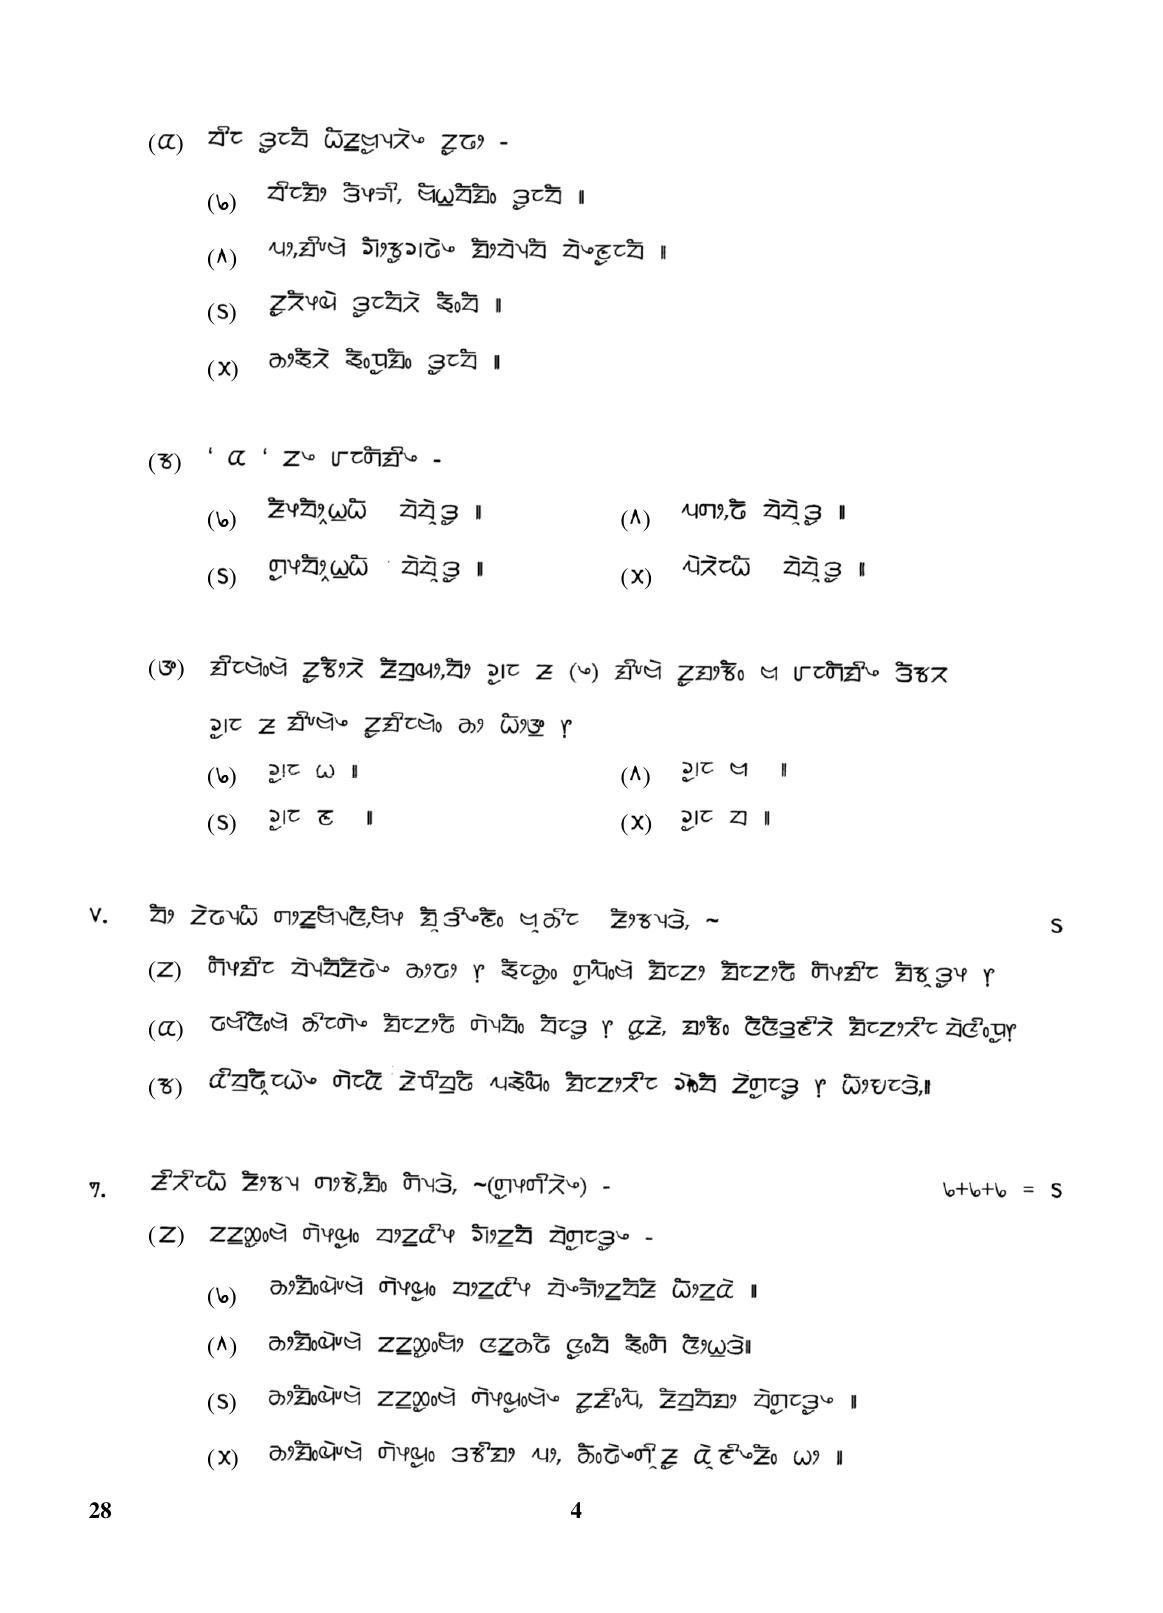 CBSE Class 10 28 (Limboo) 2018 Question Paper - Page 4